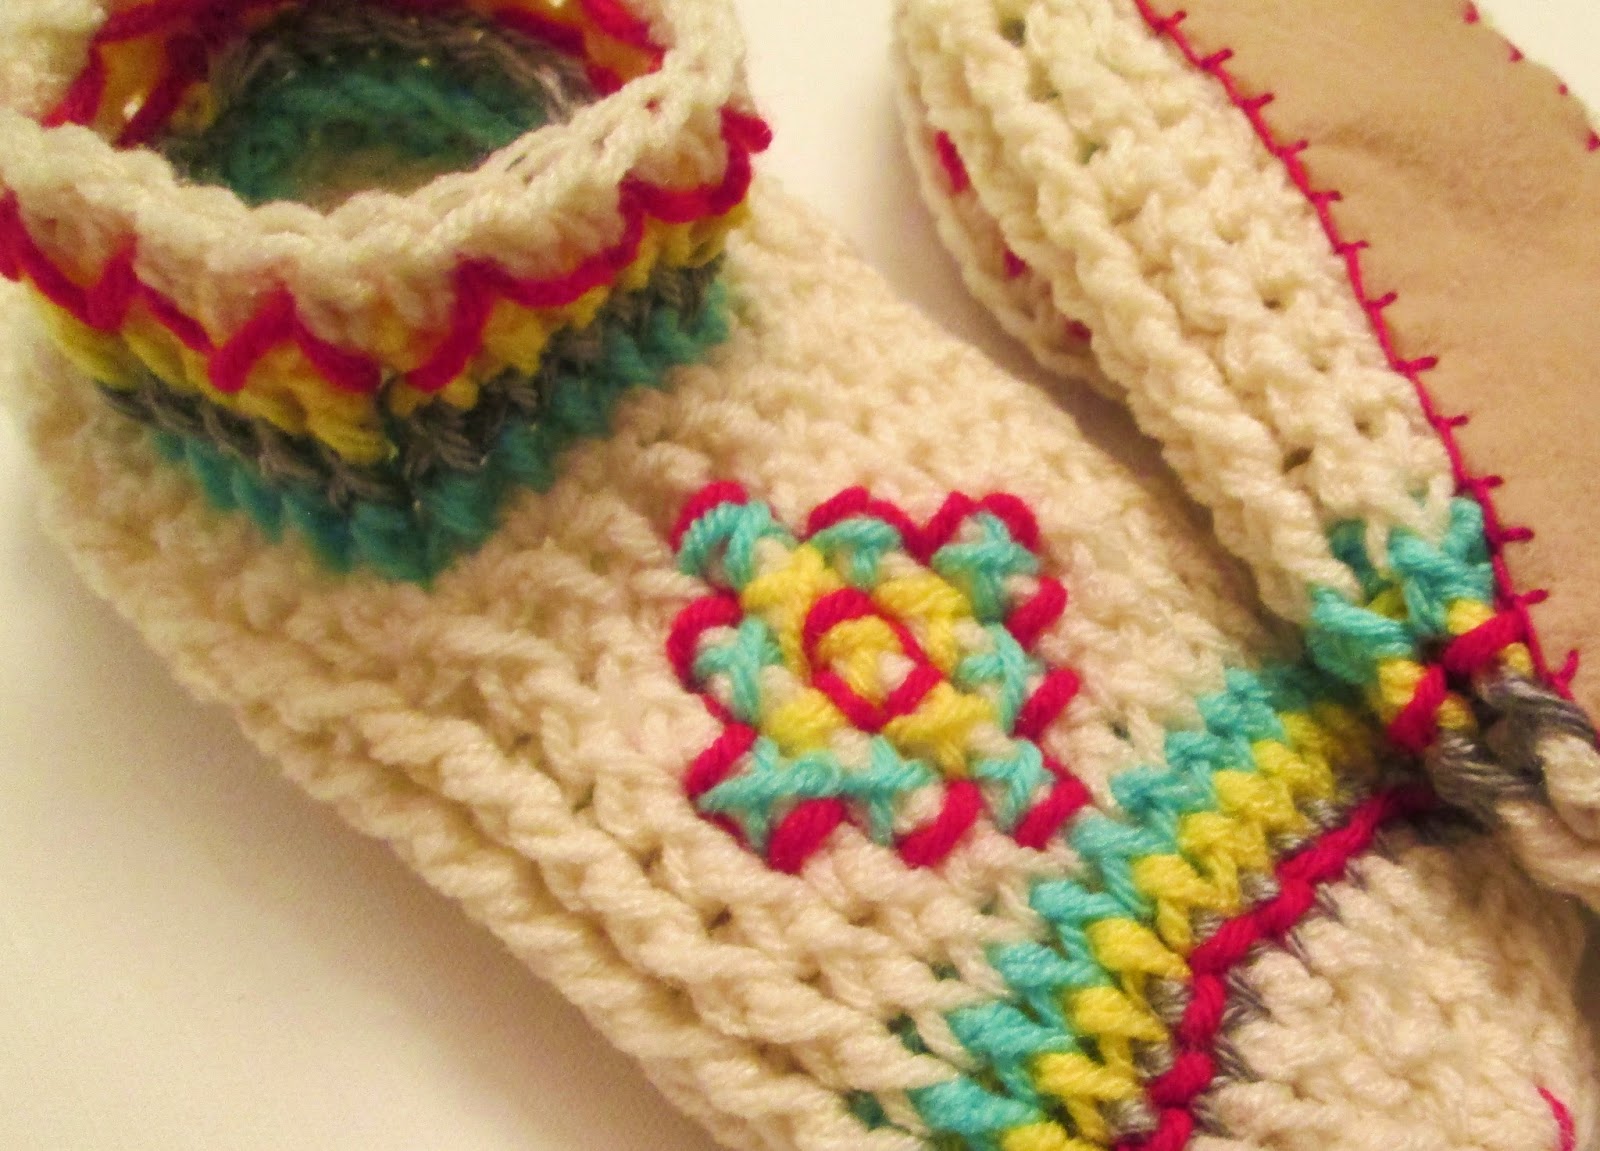 https://www.etsy.com/listing/221785671/pow-wows-crochet-moccasin-slippers